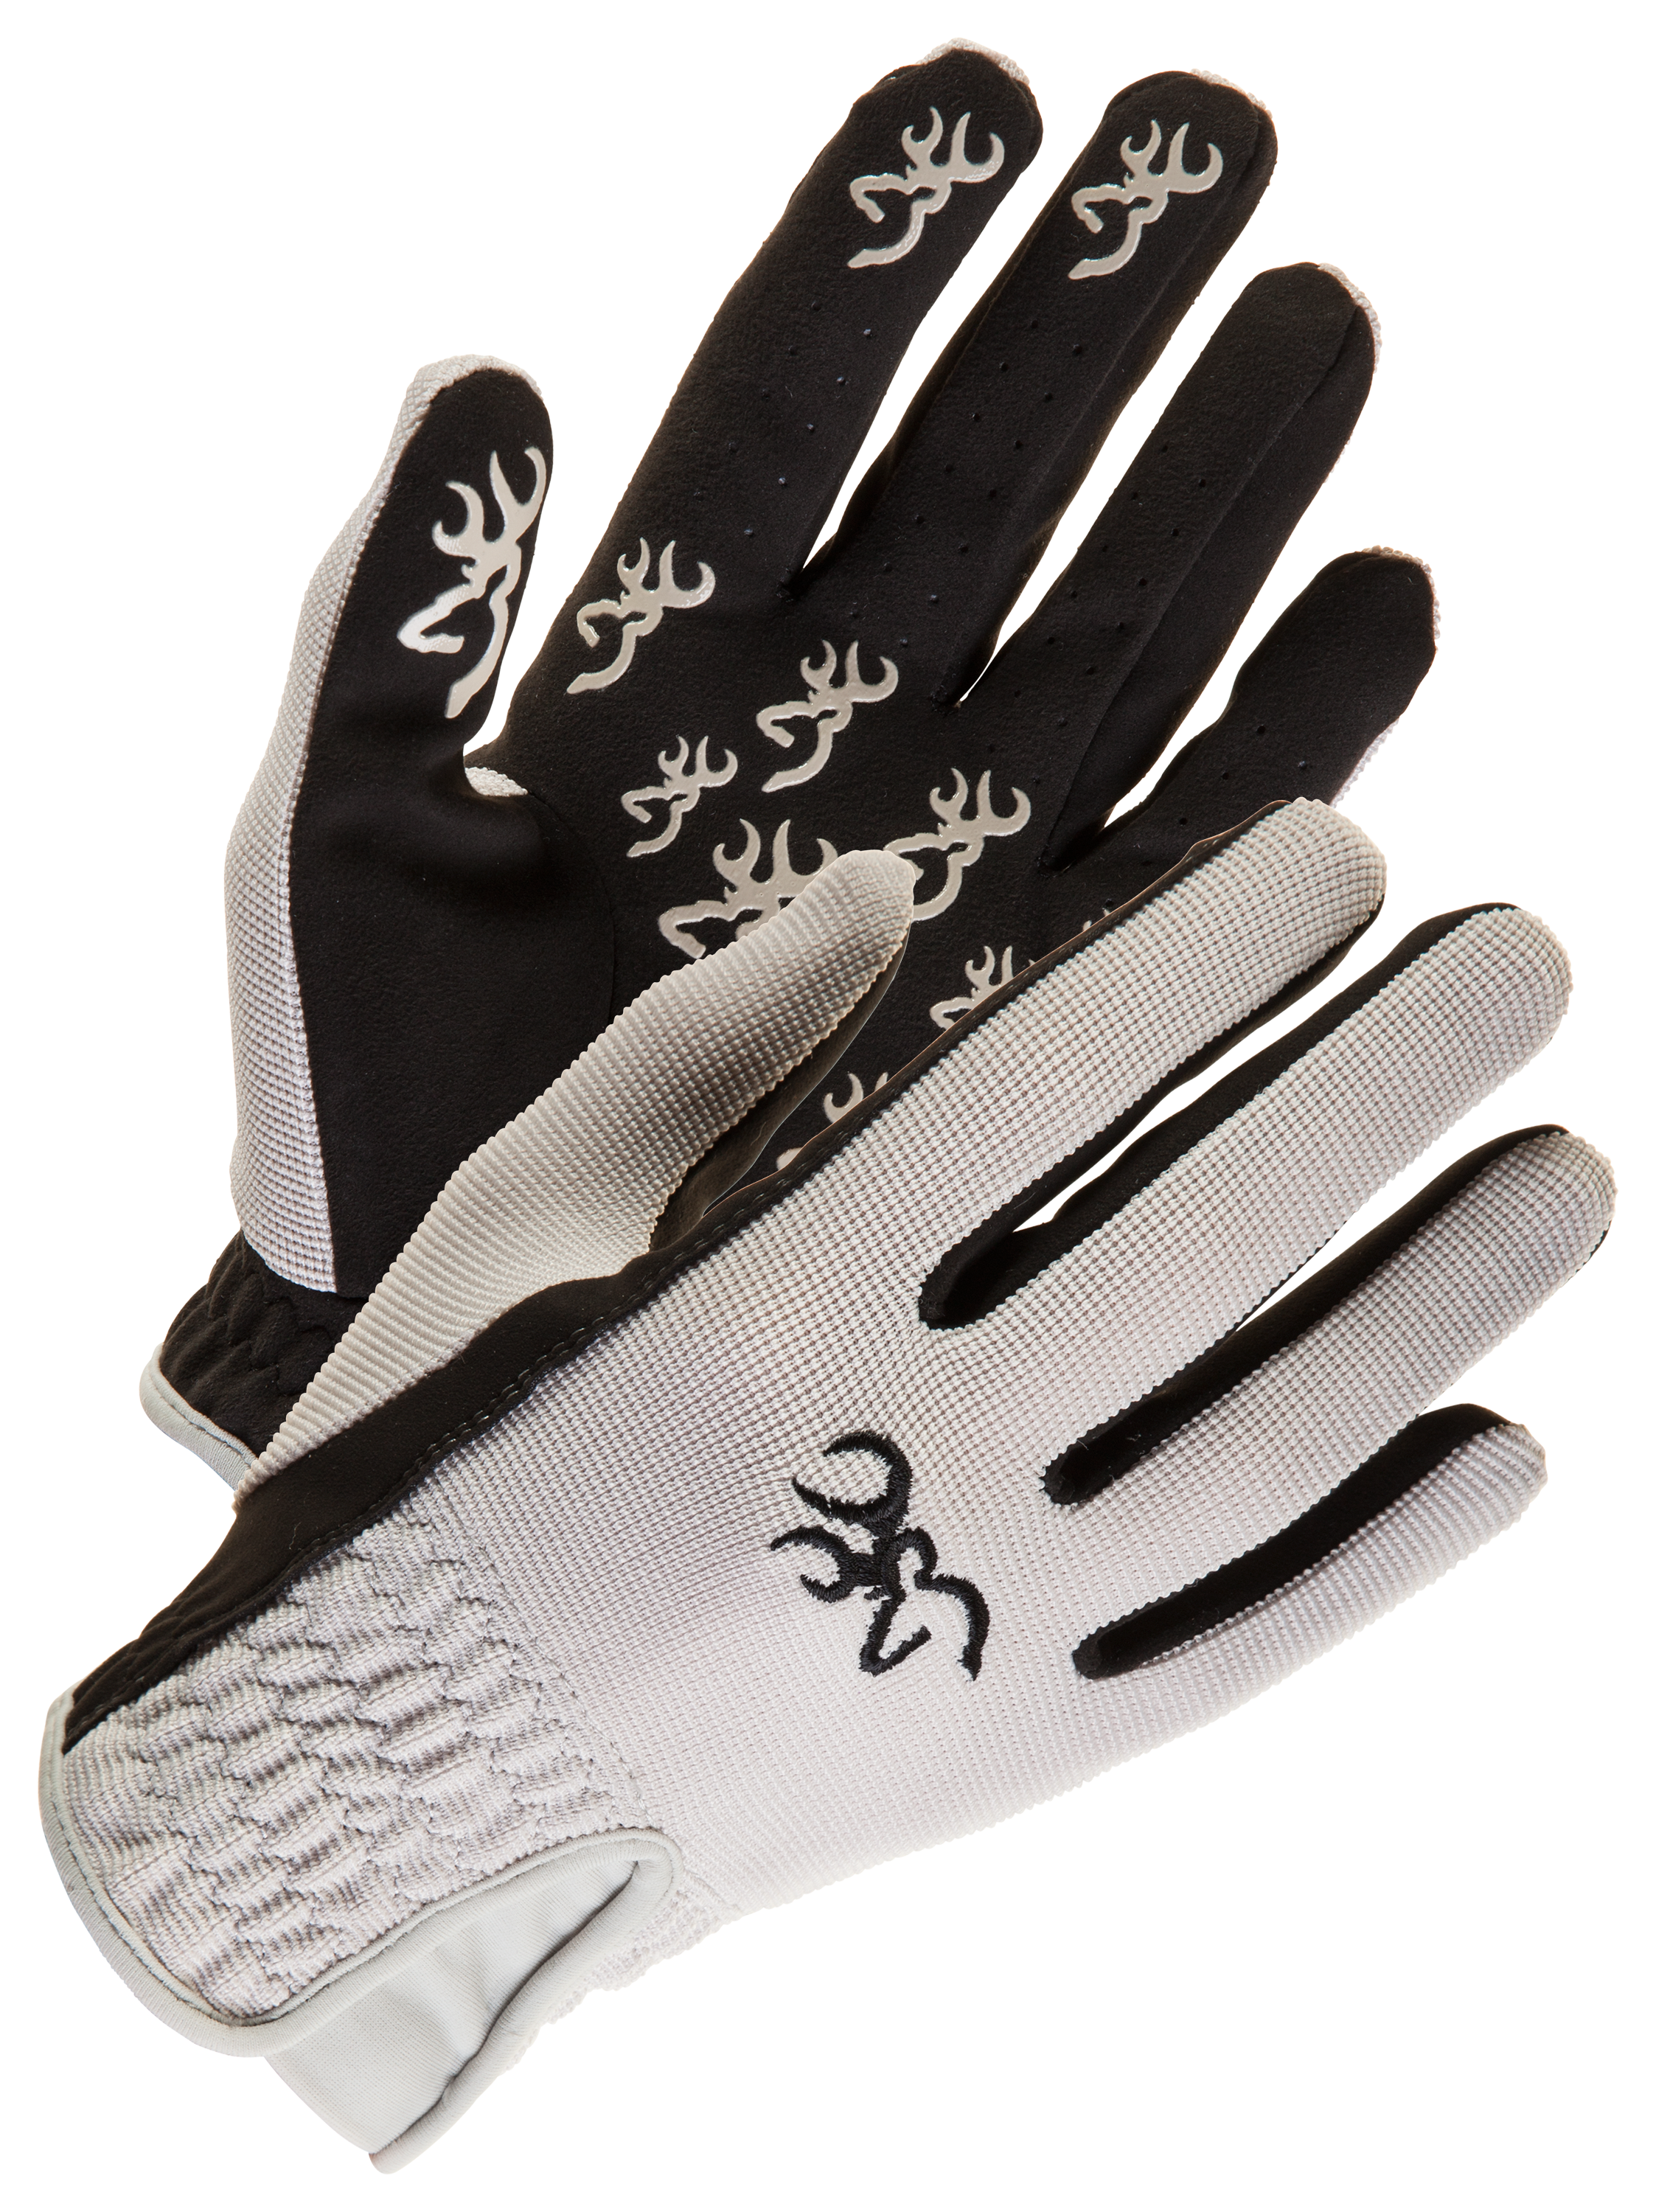 Browning Ace Shooting Gloves for Ladies